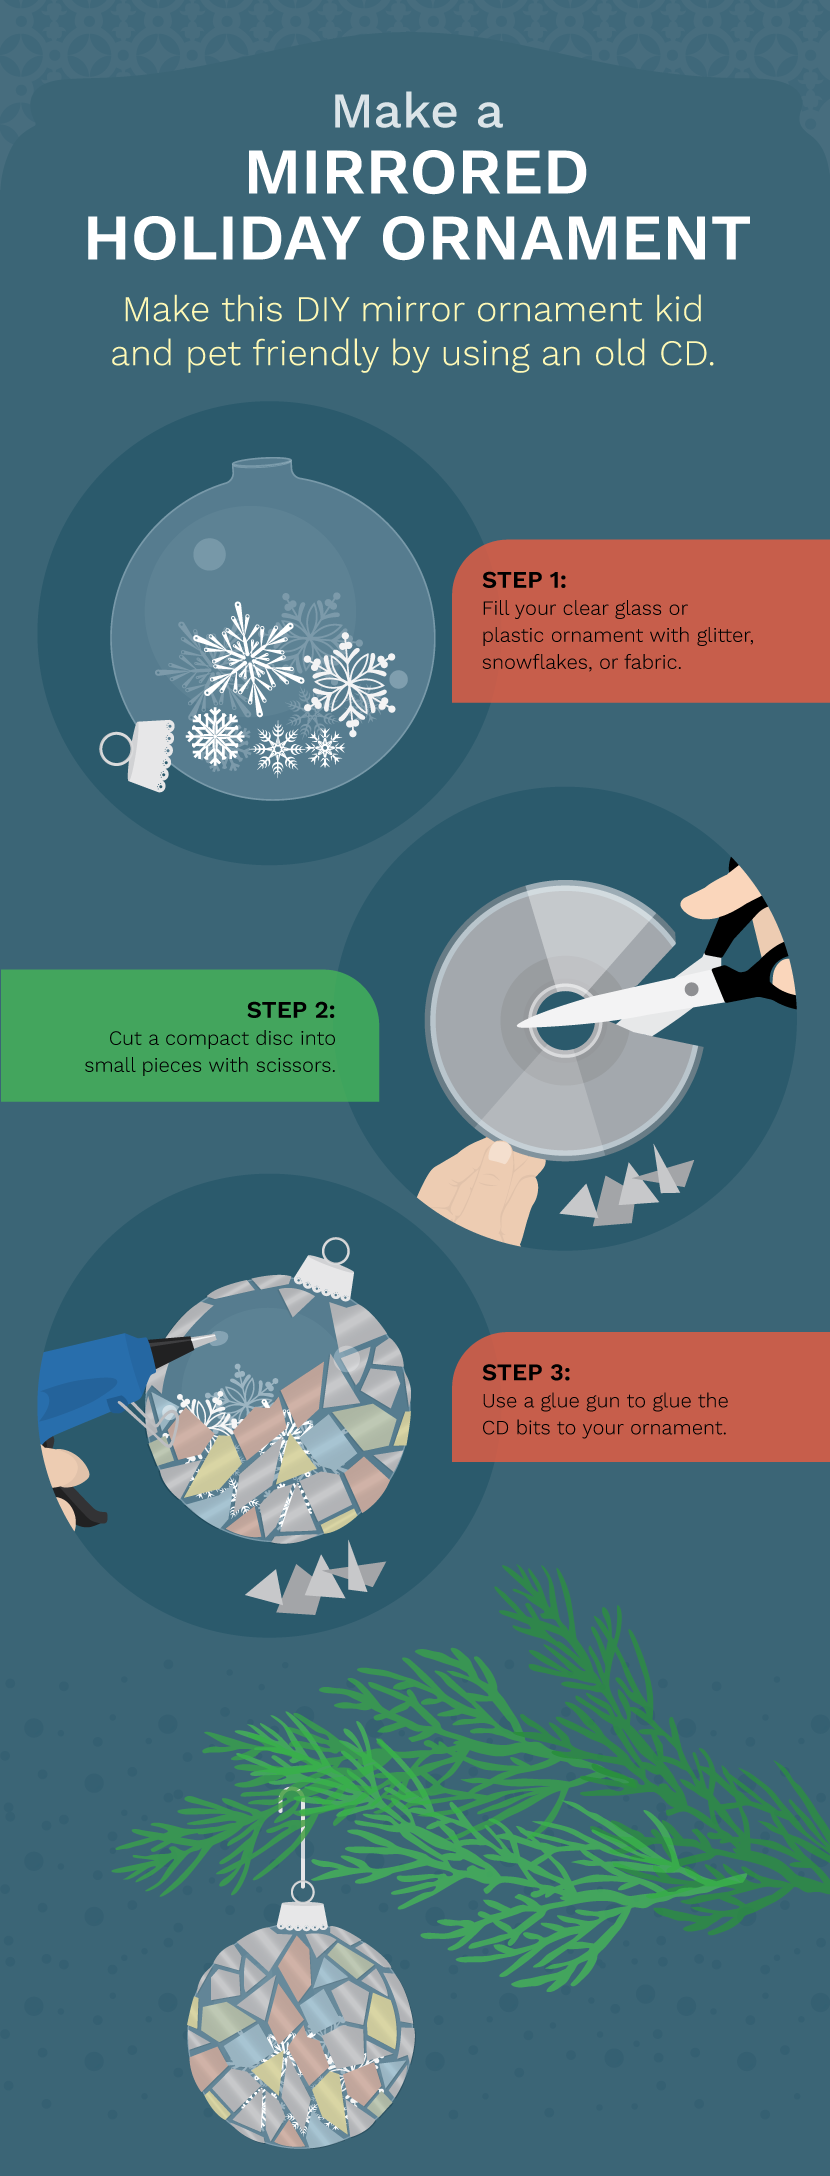 Make Mirrored Holiday Ornament - Ways to Reuse Broken Glass and Mirrors in Your Decor